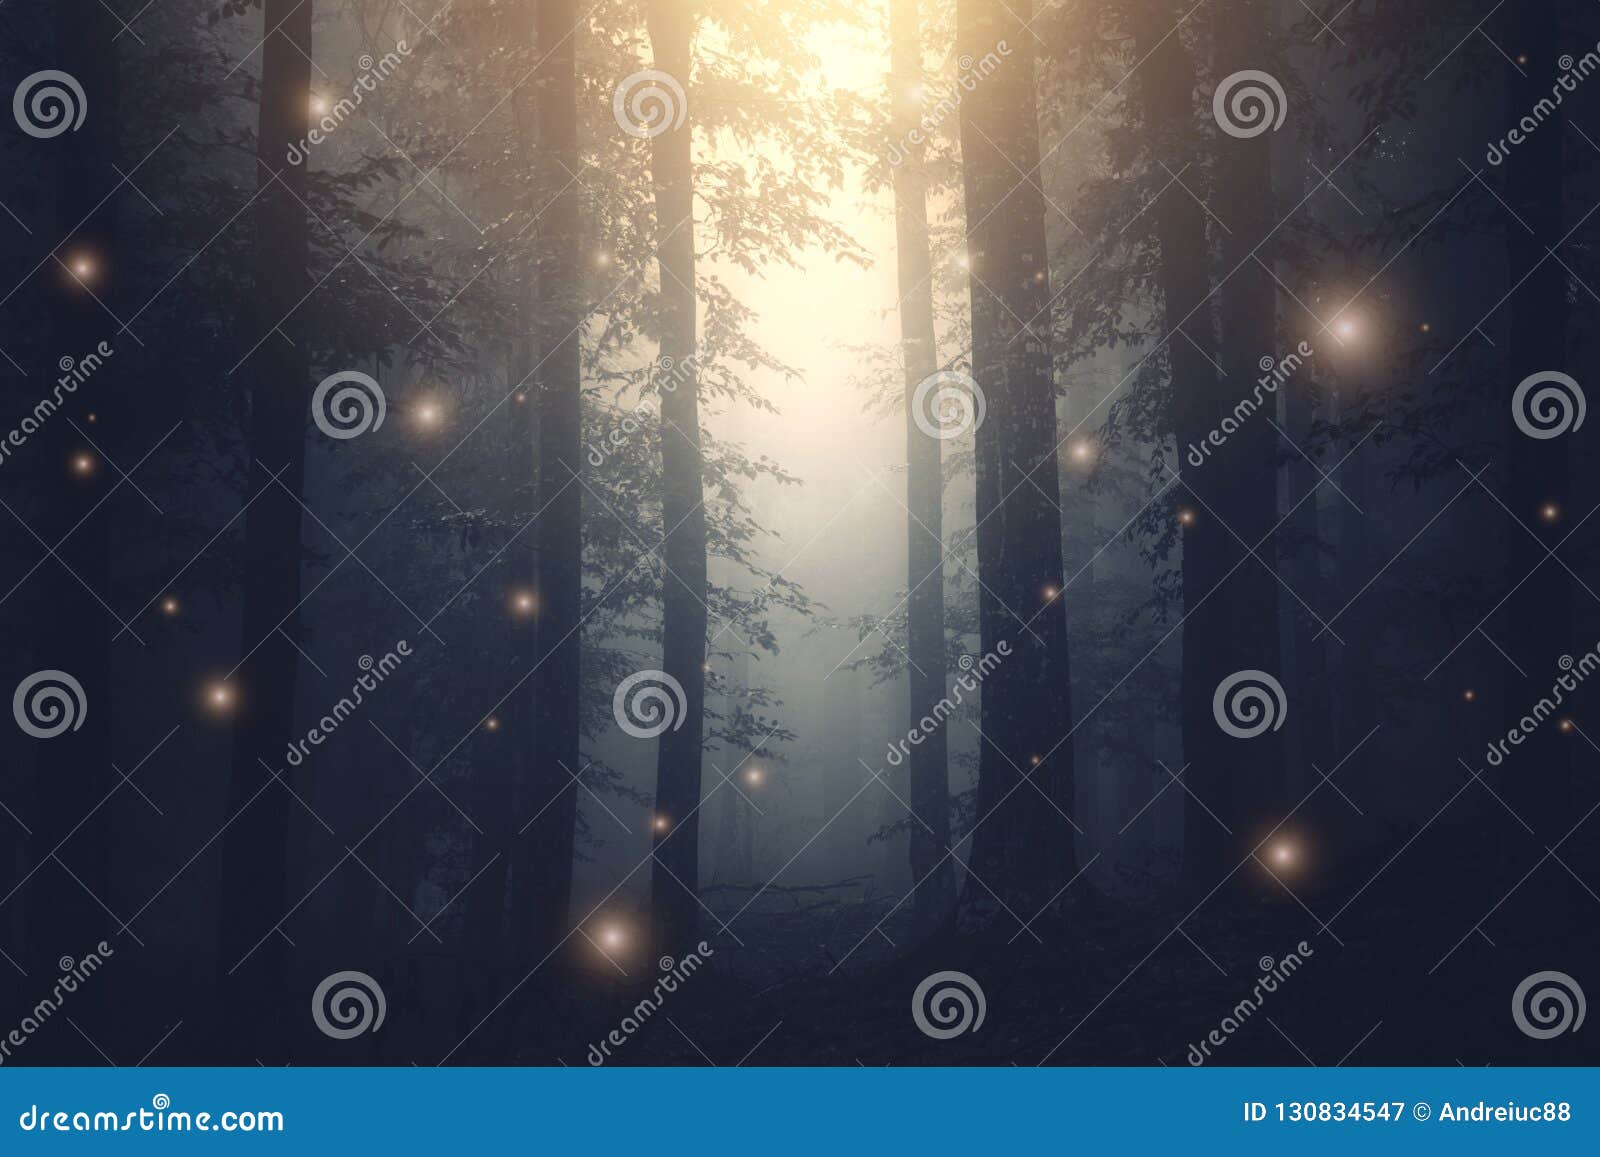 magical fantasy fairy lights in enchanted forest with fog